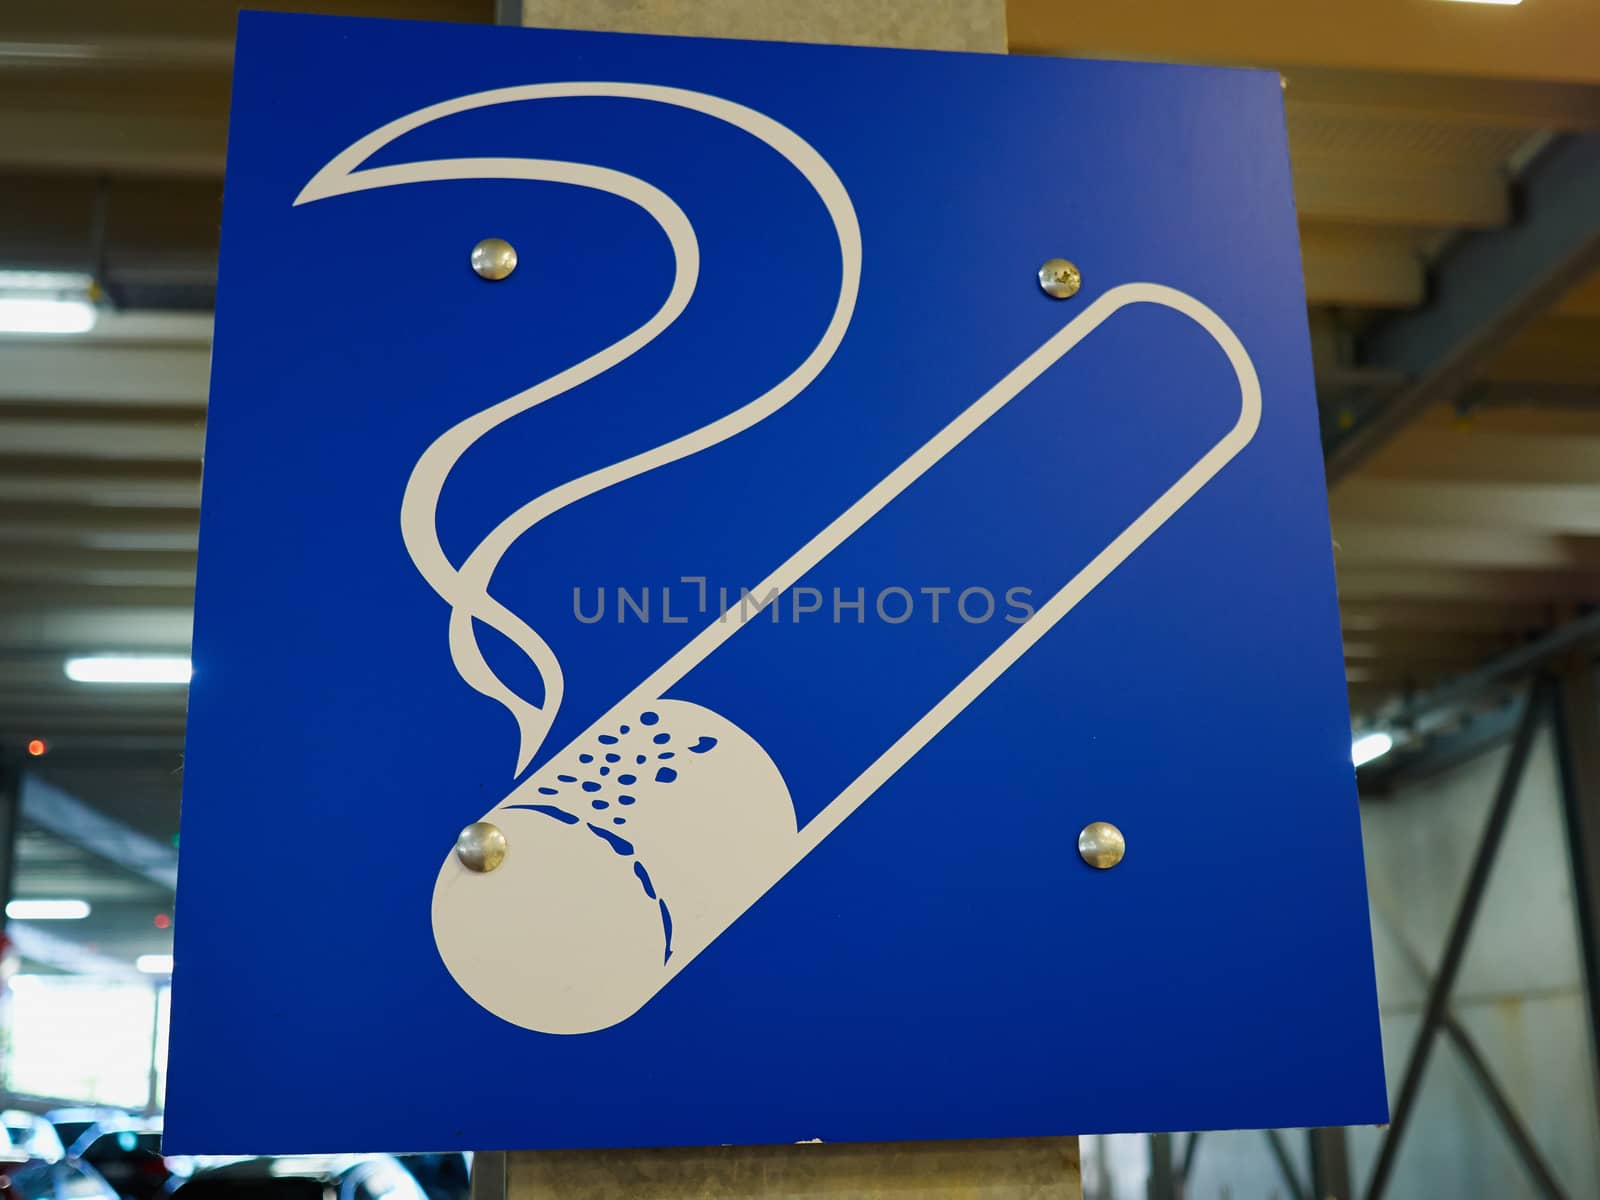 Designated blue graphic smoking area zone sign in a public building        